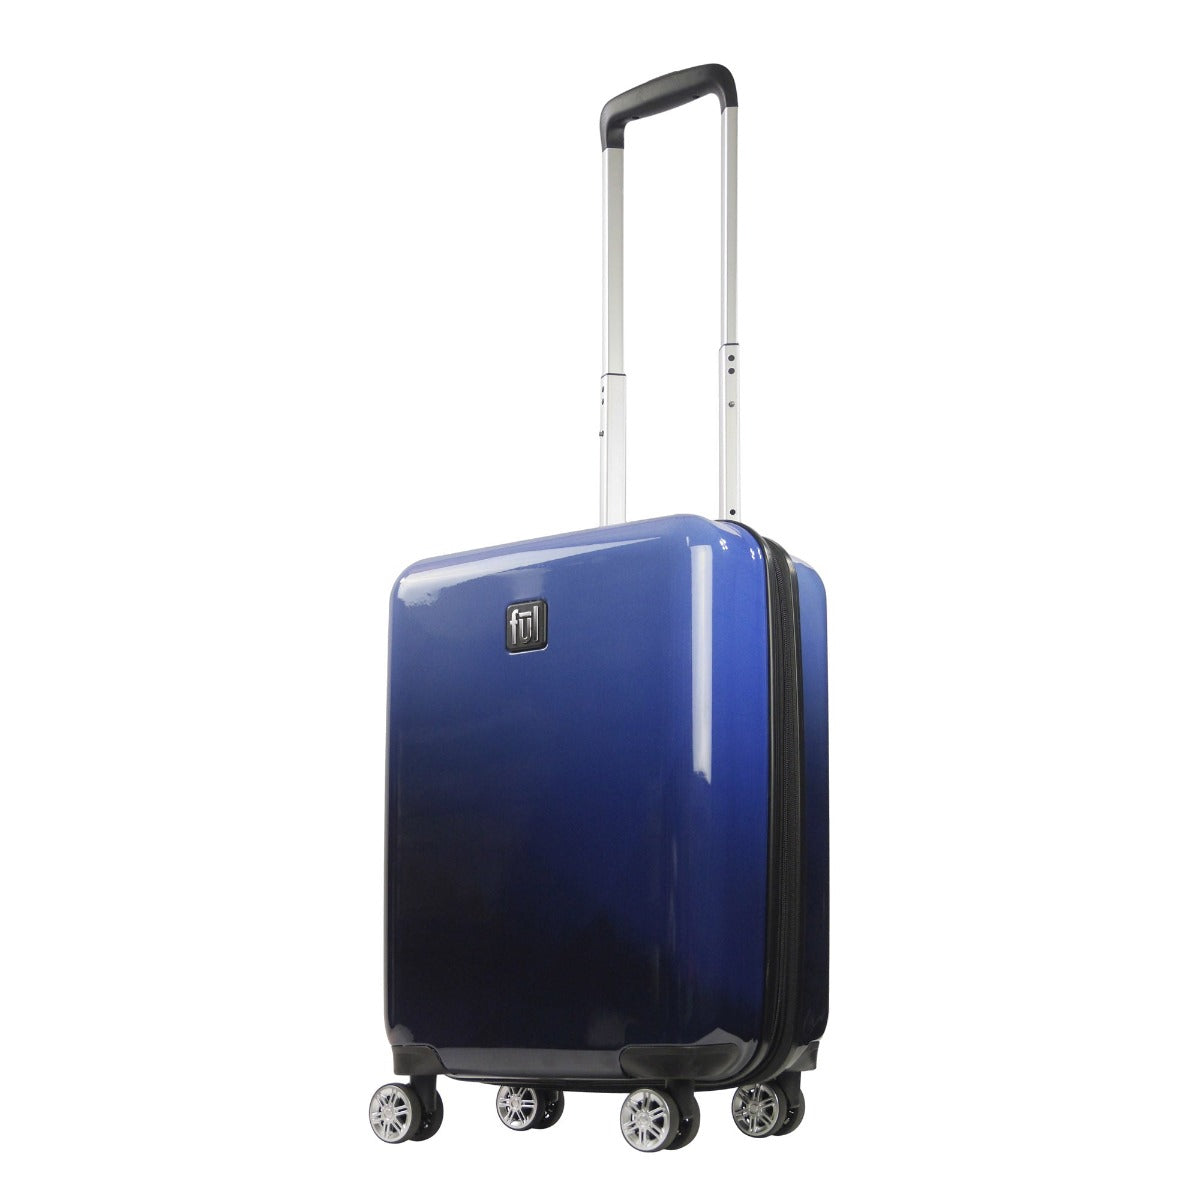 Blue Ful Impulse Ombre hardside spinner suitcase 22" carry-on rolling luggage